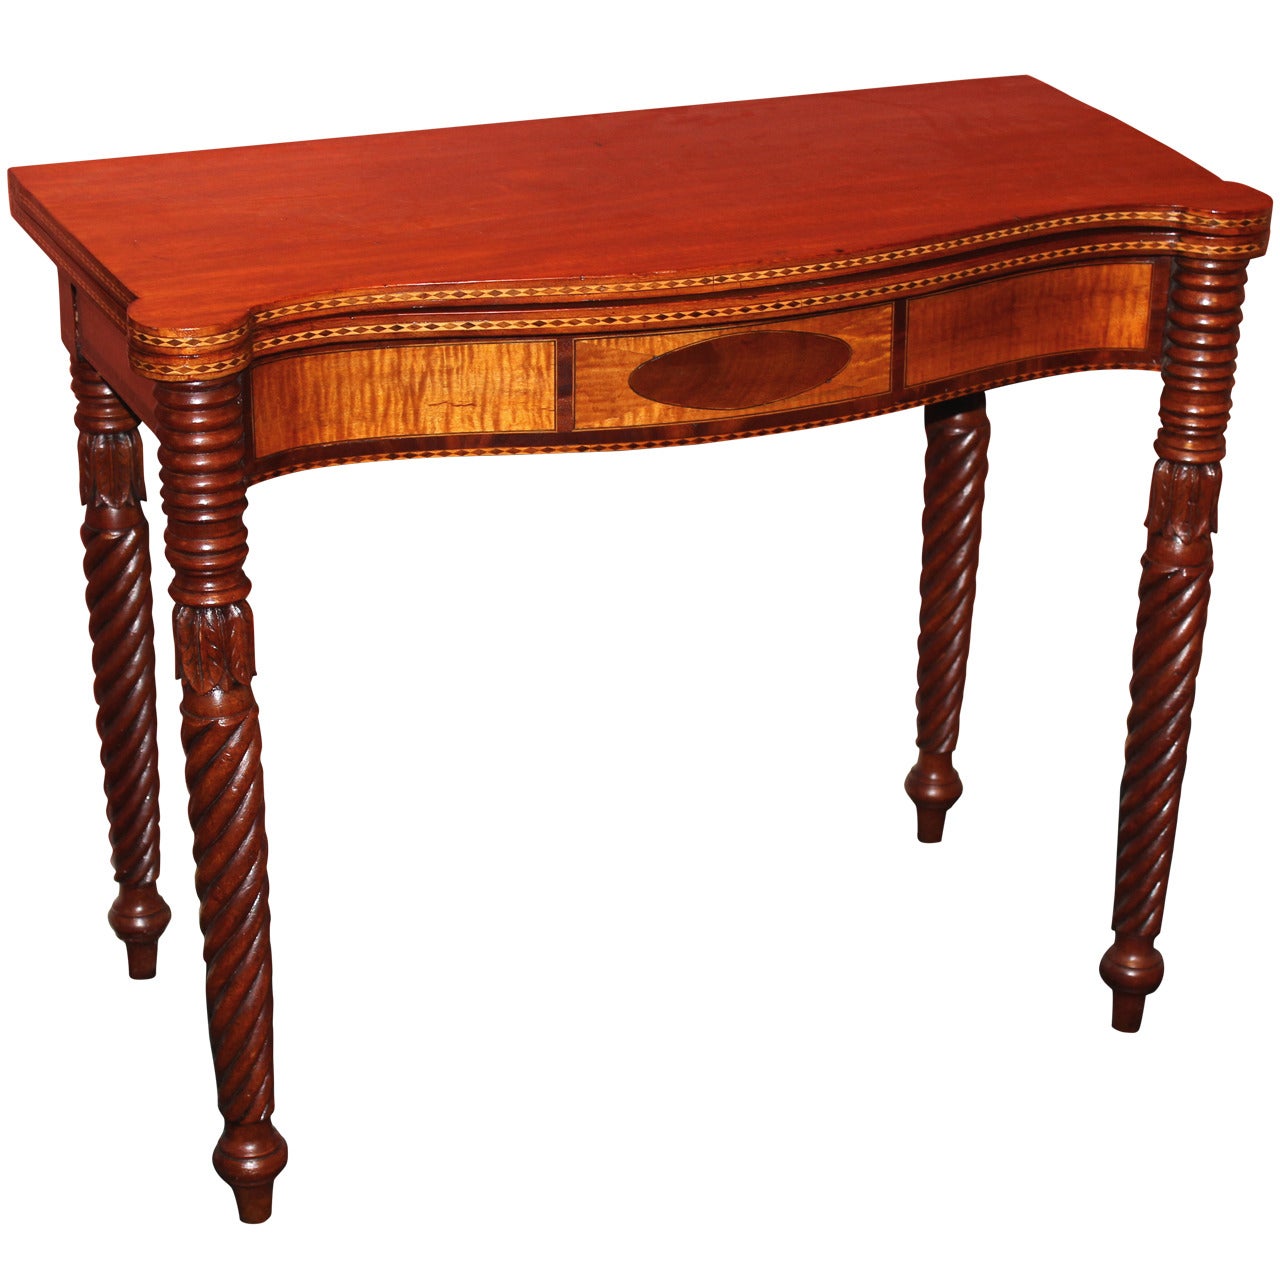 Federal Period , Sheraton Card Table from Salem, Massachusetts